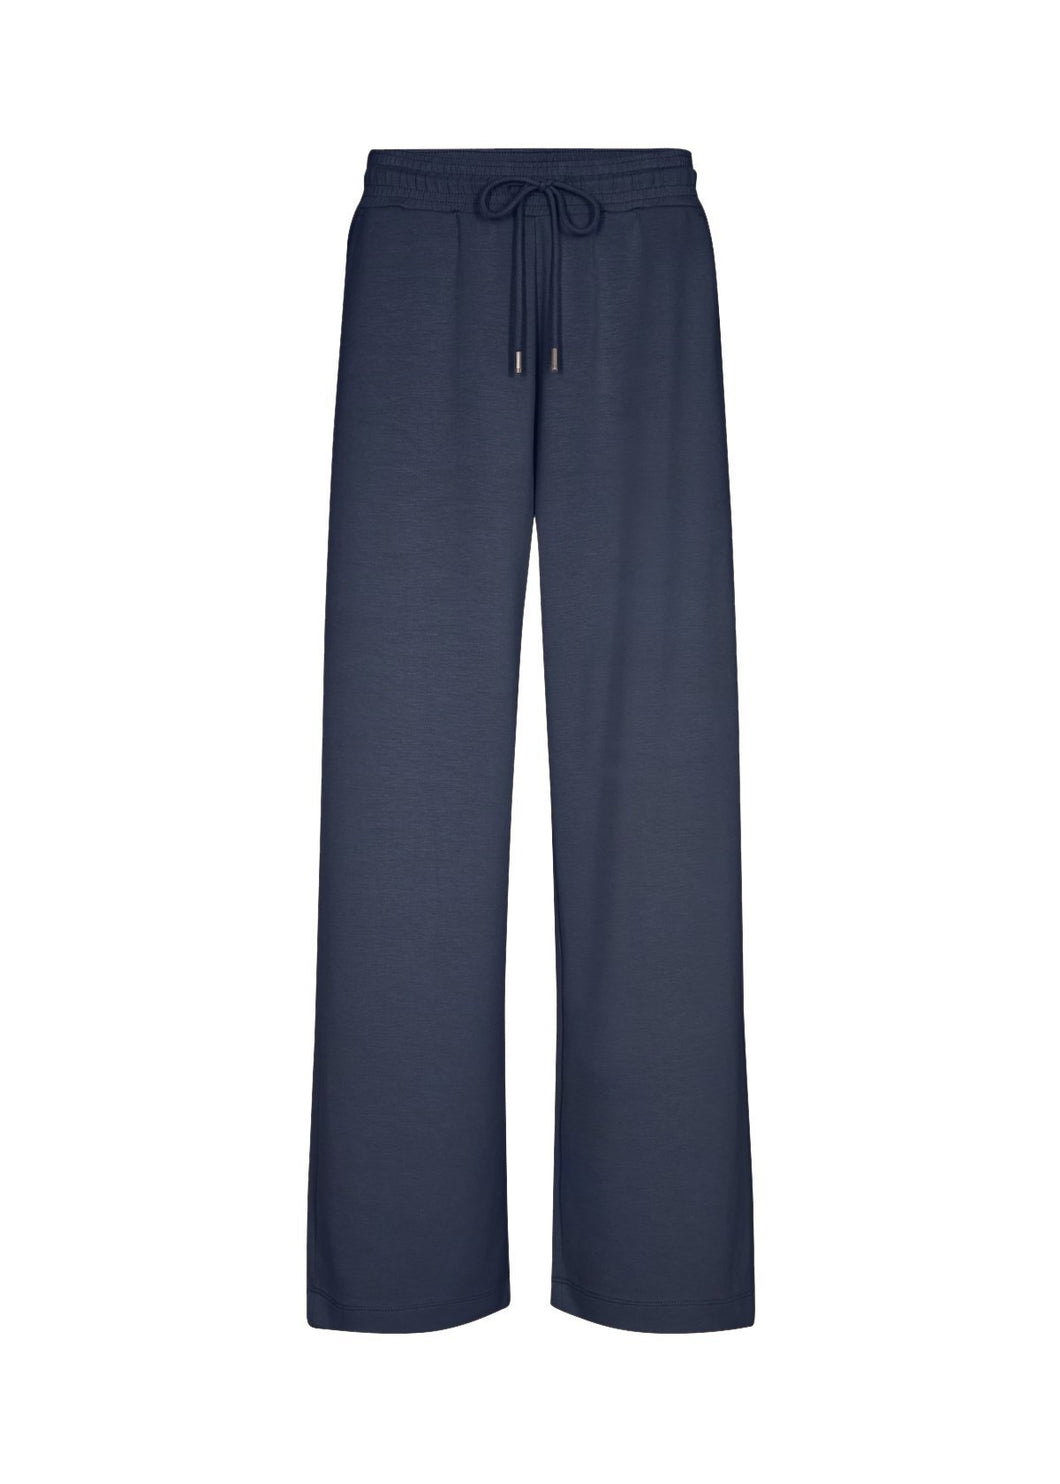 Banu Pants In Navy Trousers Soyaconcept 